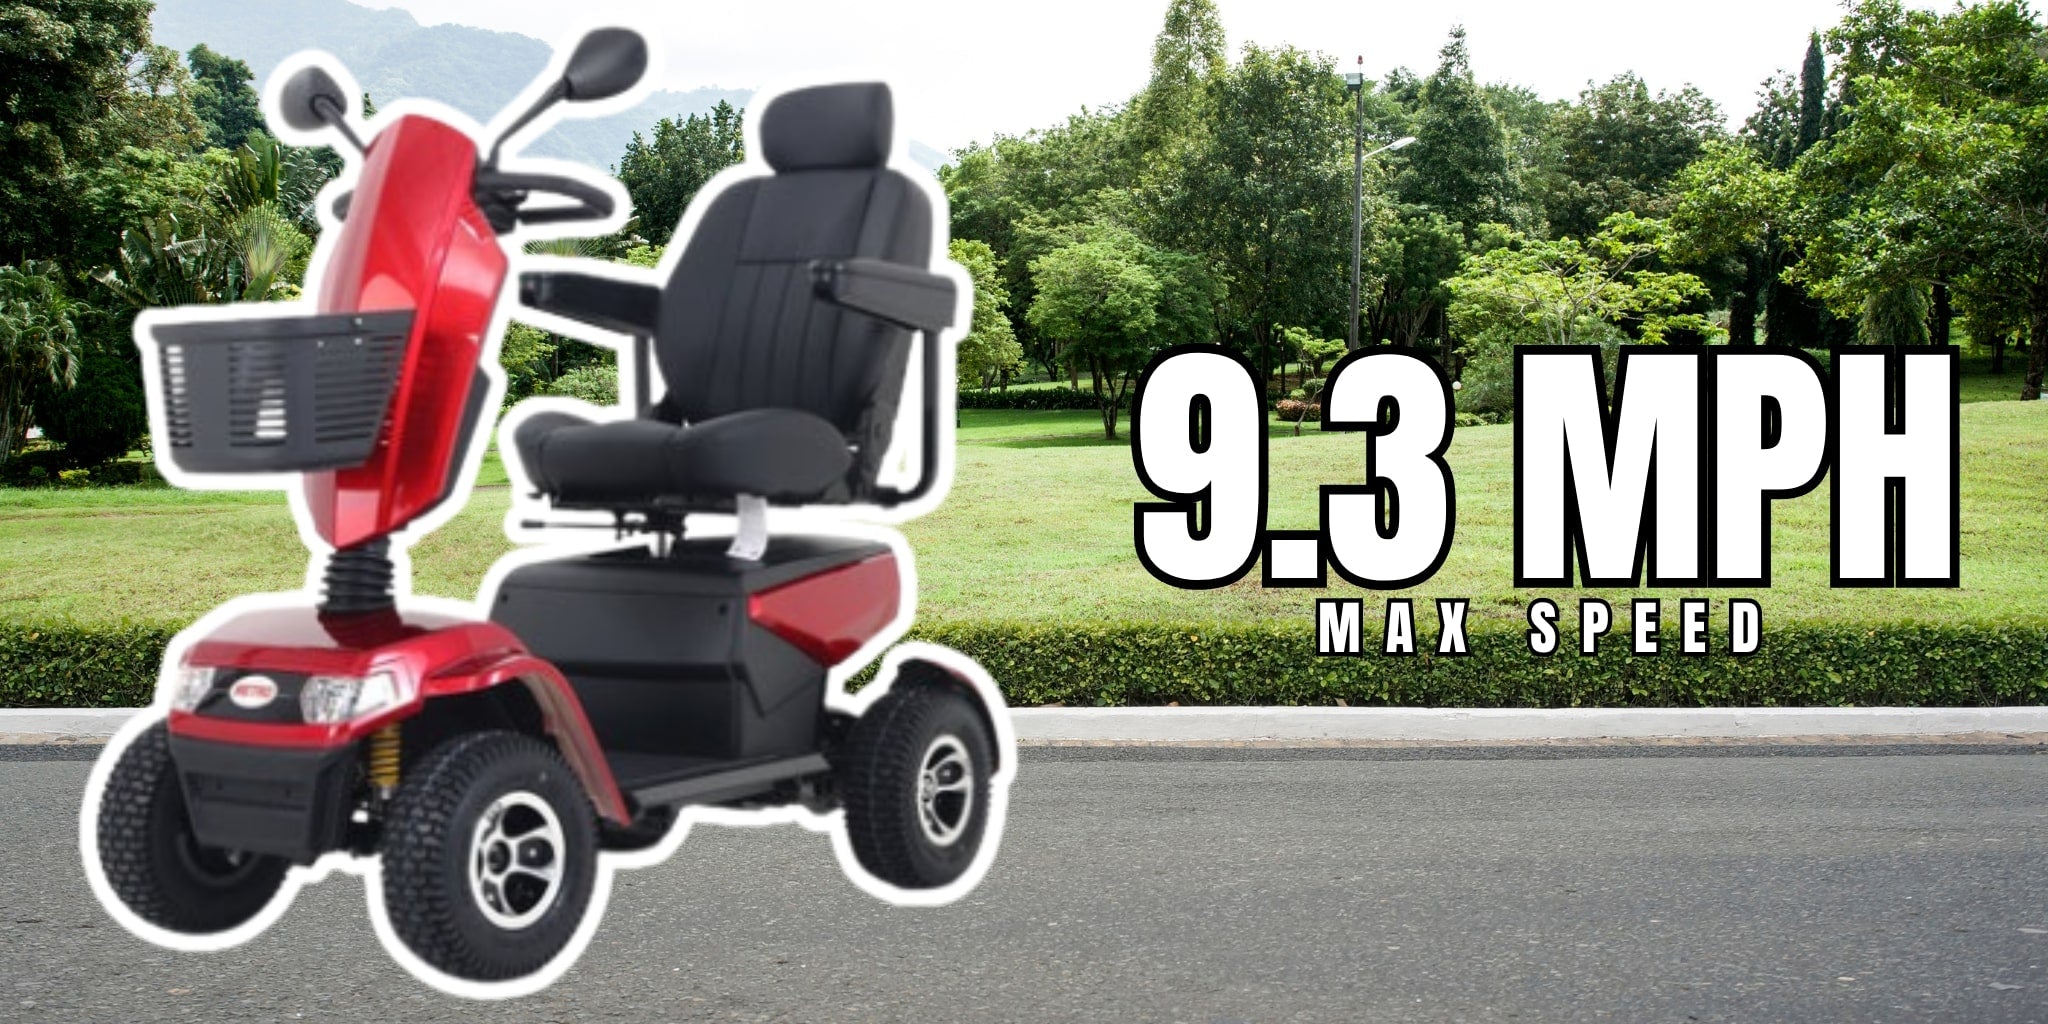 Foldable Mobility Scooter S800